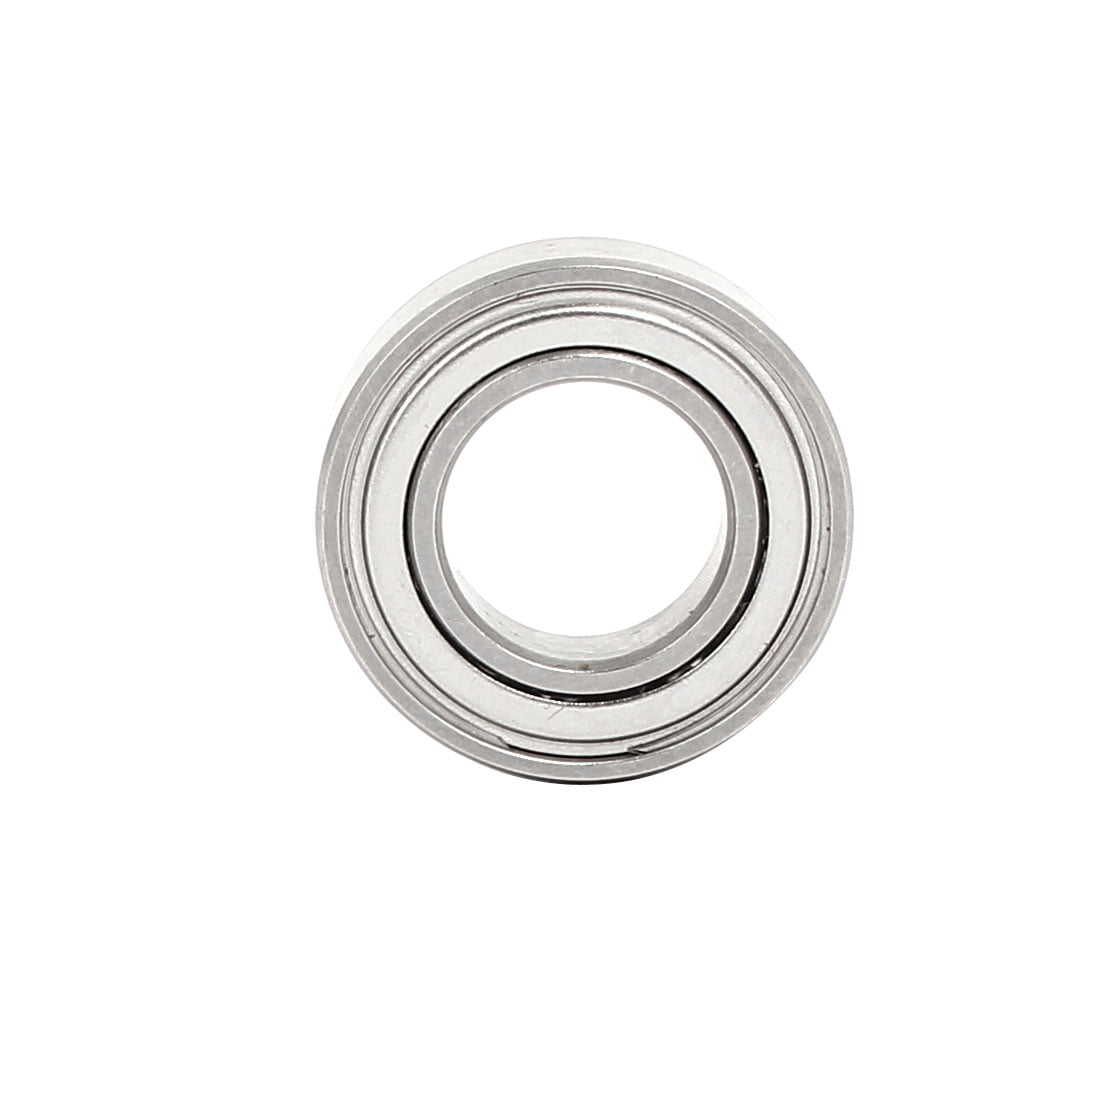 SuperWarehouse 19mmx10mmx5mm Stainless Steel Shielded Deep Groove Ball Bearing 6800 2pcs swh722459ca174659